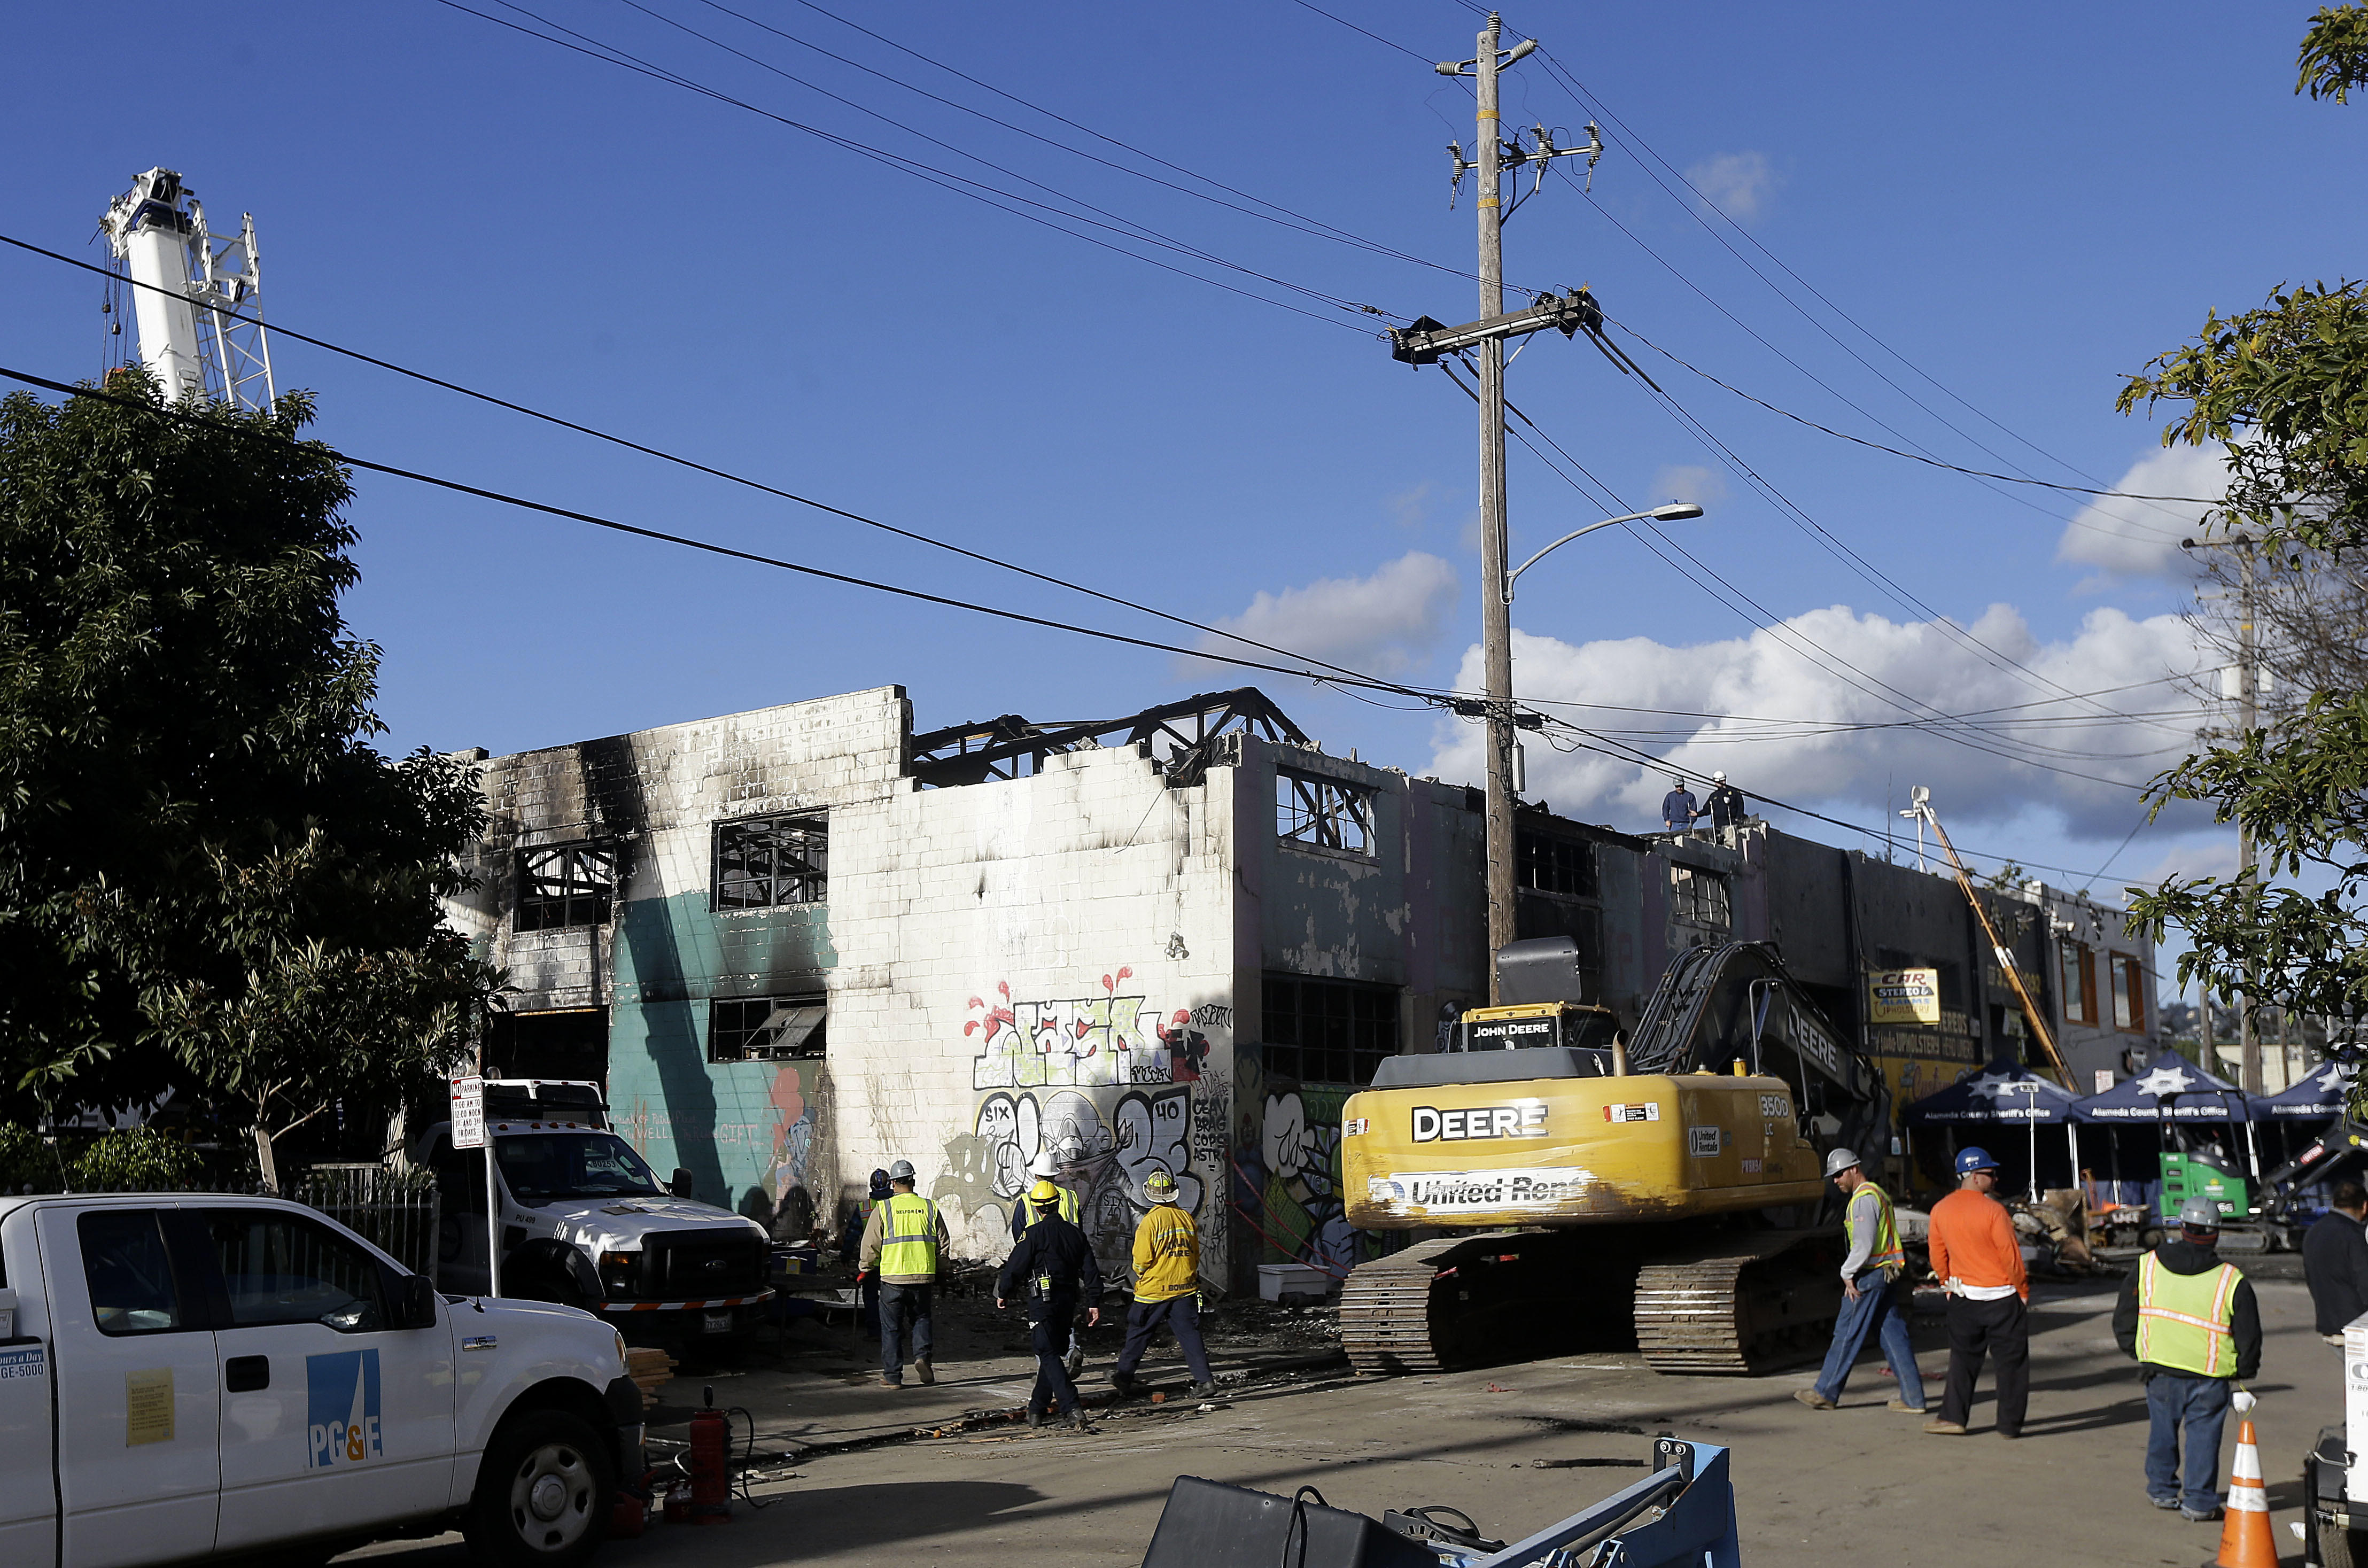 Oakland Ghost Ship Warehouse Fire Search Concludes After 4 Days Leaving Death Toll At 36 Cbs News